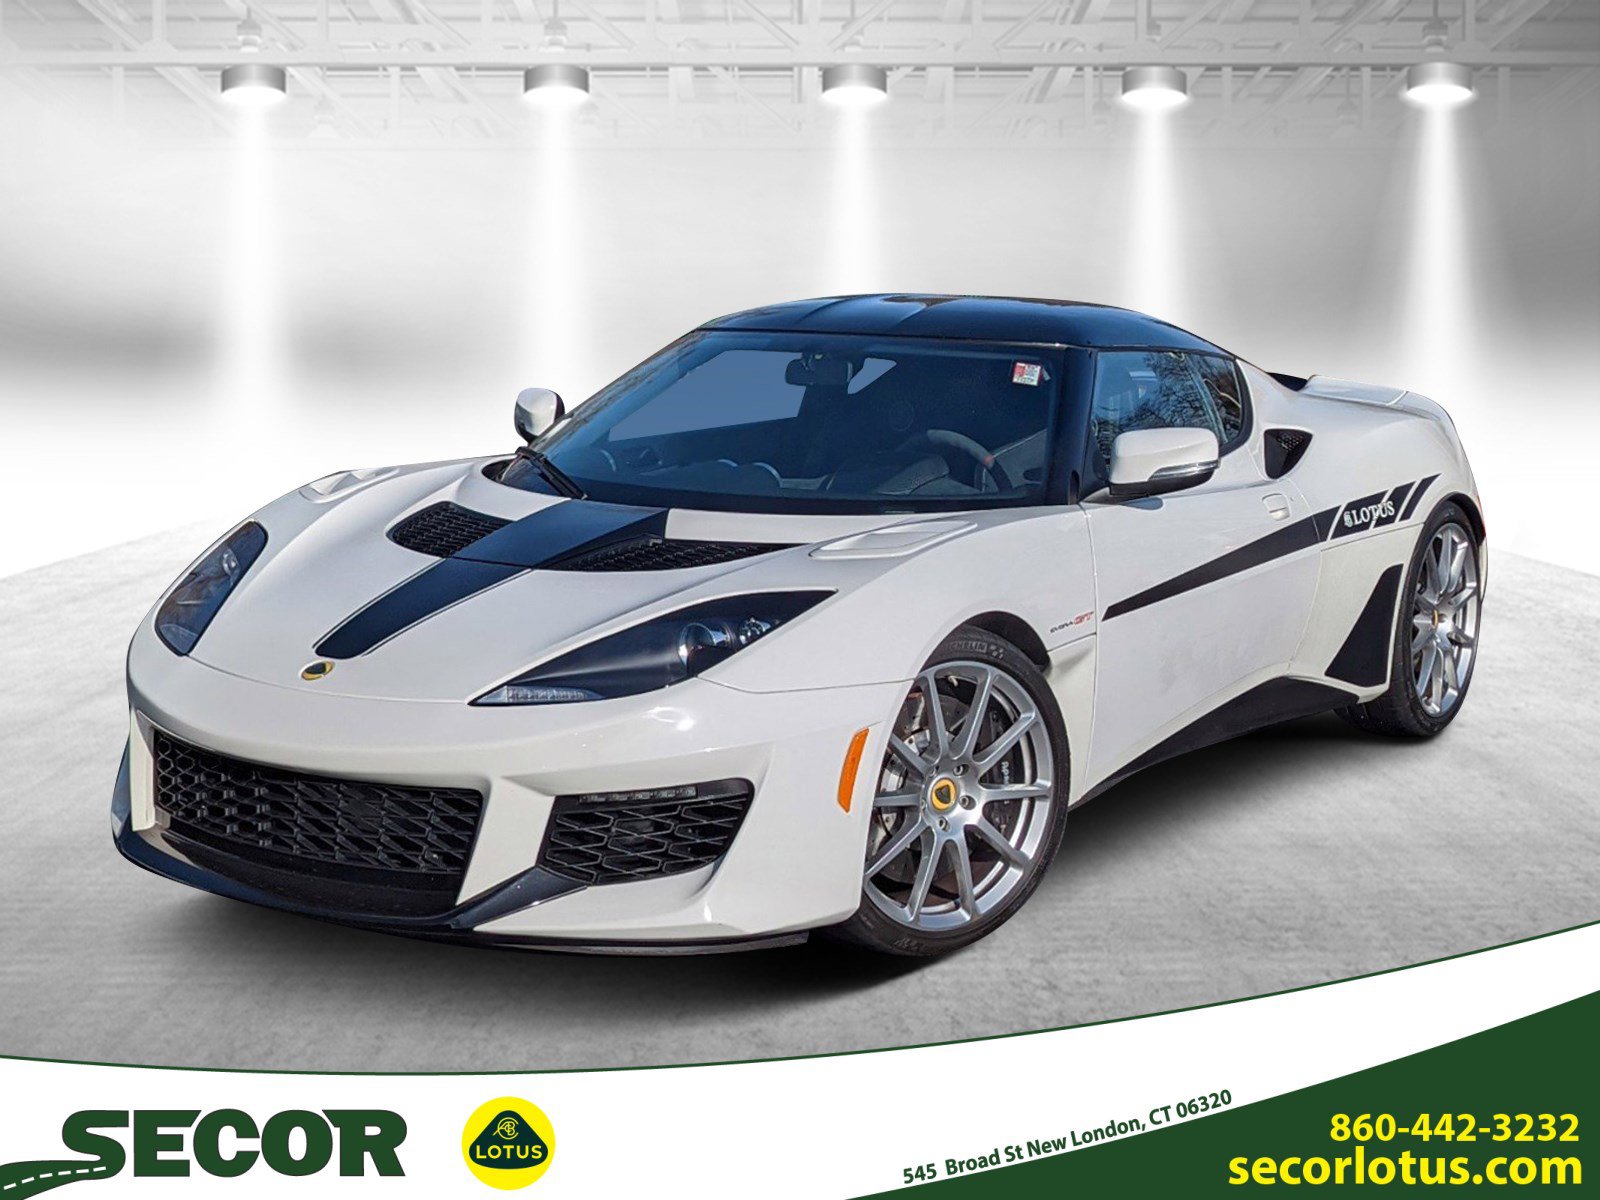 Used Lotus Evora for Sale Right Now - Autotrader